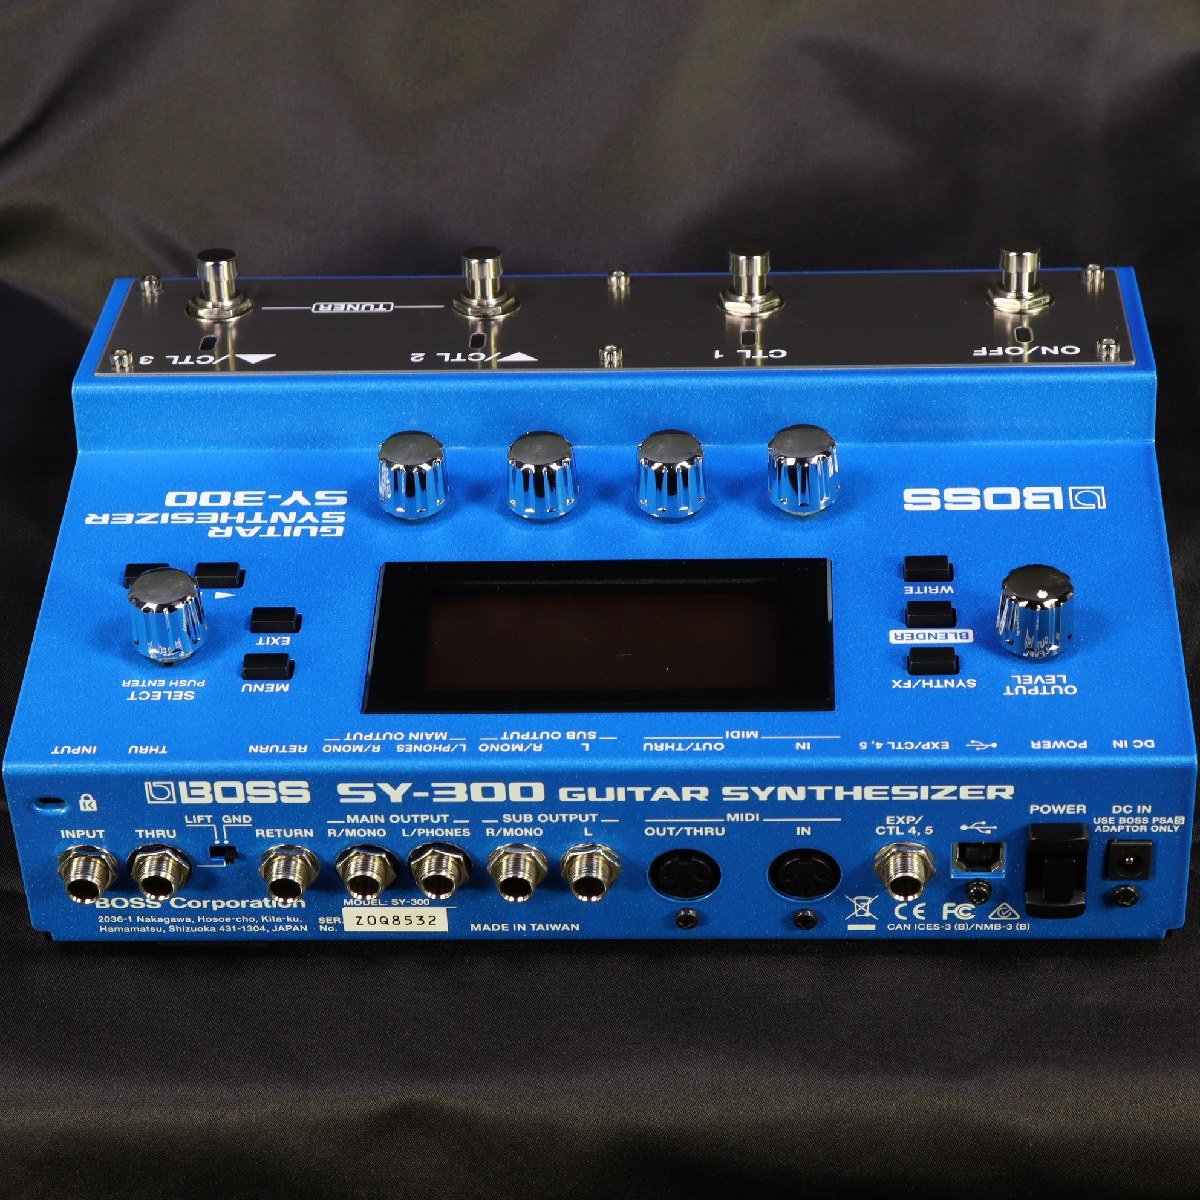 BOSS SY-300 Guitar Synthesizer ギターシンセサイザー-